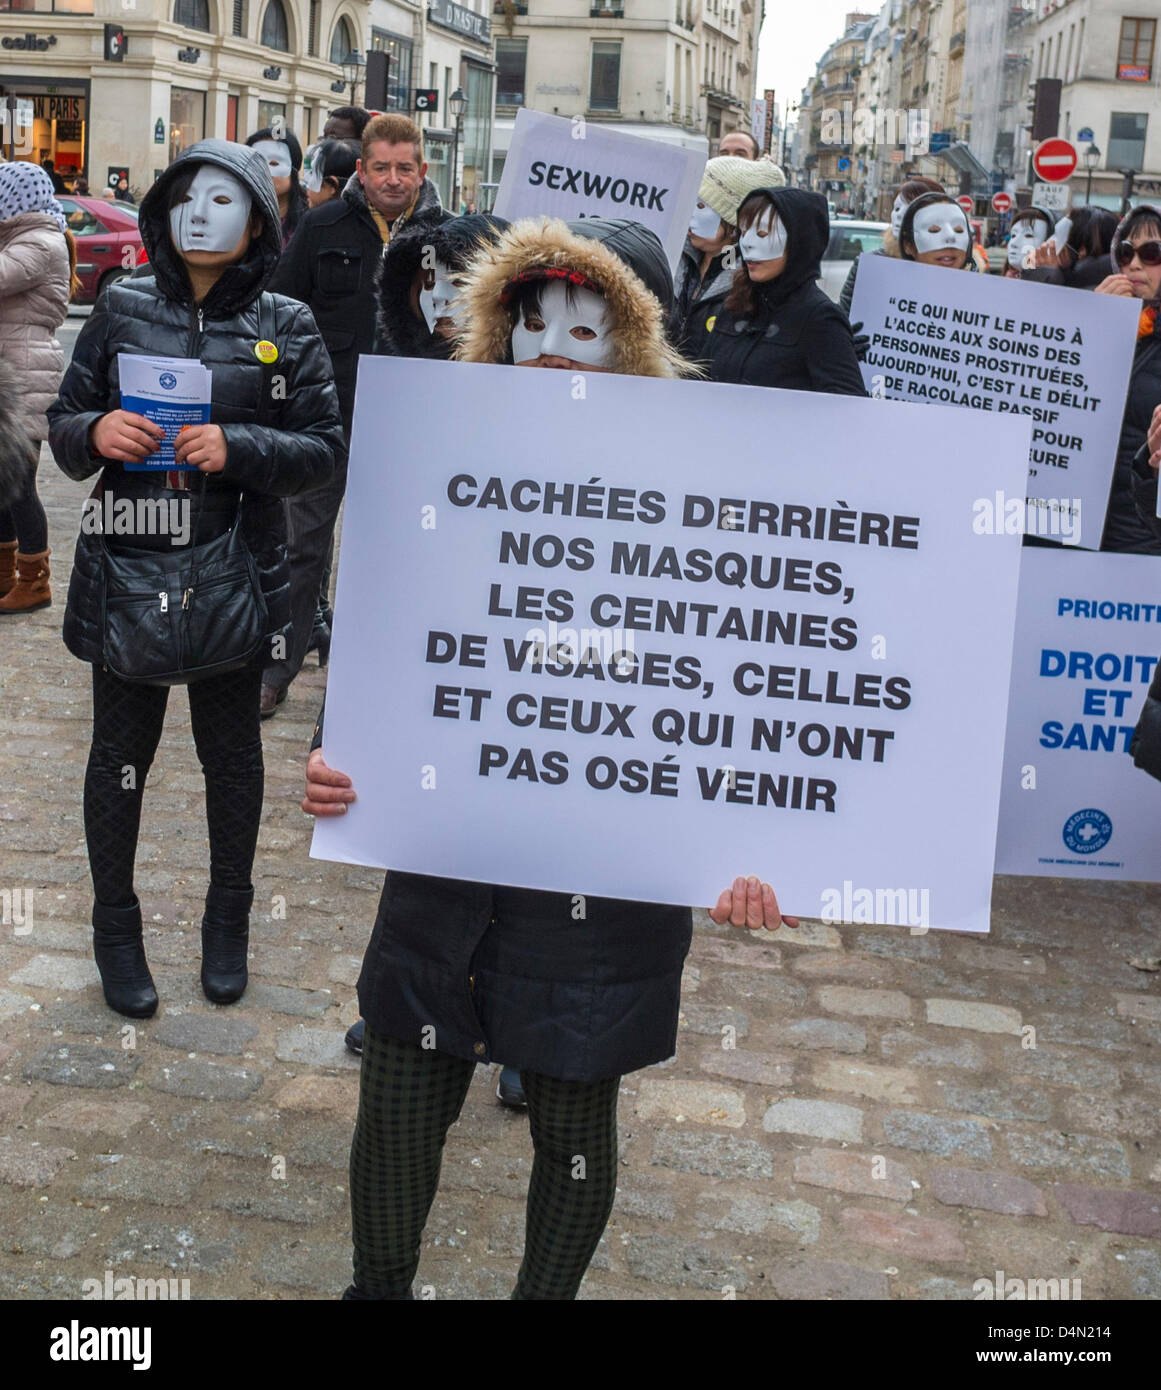 Paris, France, French N.G.O's protesting Against Anti-Prostitution Law  Forbidding passive soliciting for Clients, Chinese Prostitute in Mask,  Migrants Holding Protest Signs on Street "Hidden By Our Masks, Hundreds of  Faces, and those